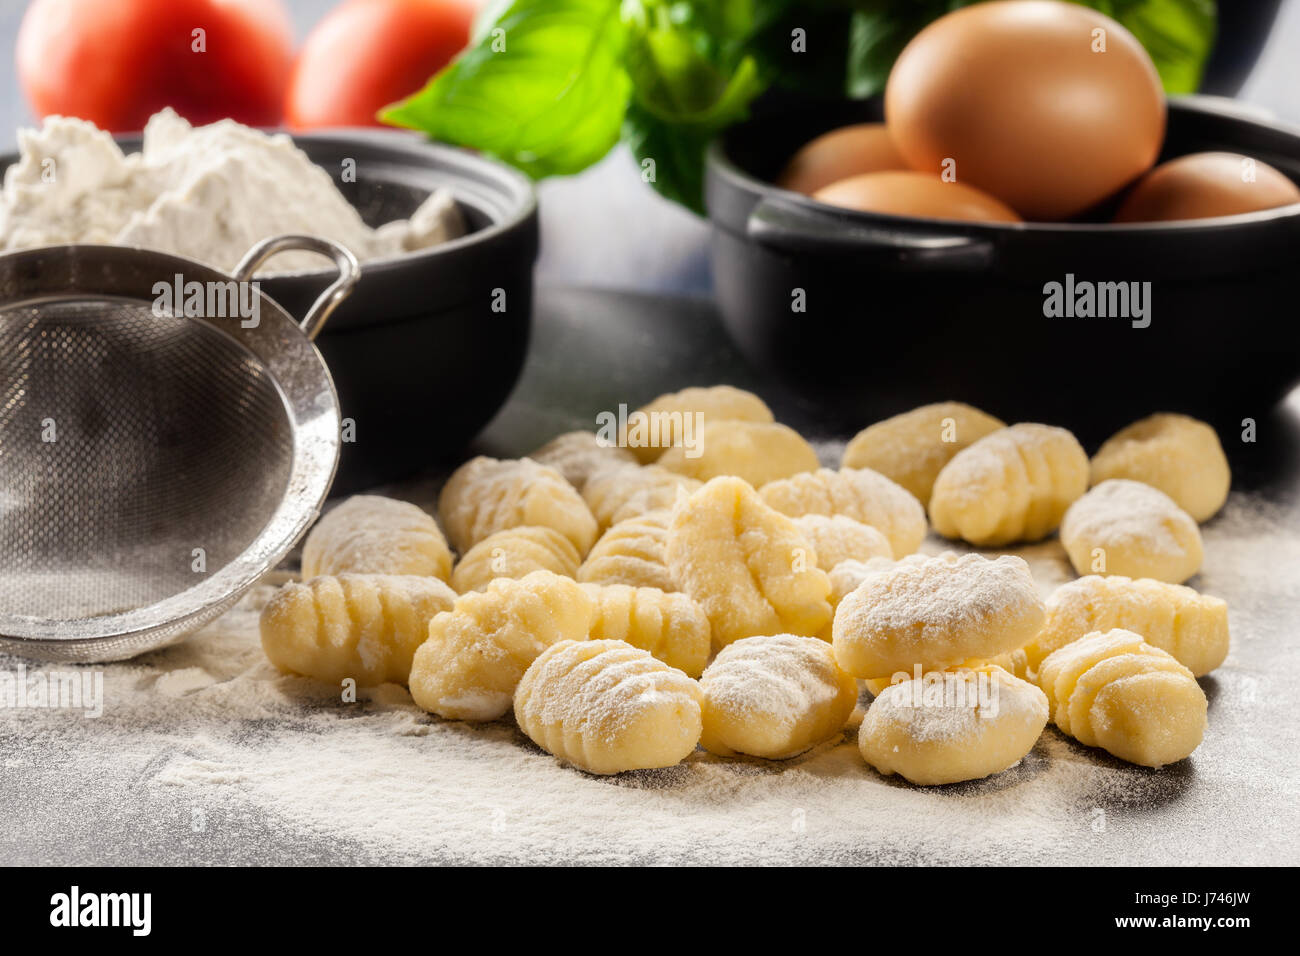 Uncooked homemade gnocchi on black cutting board Stock Photo